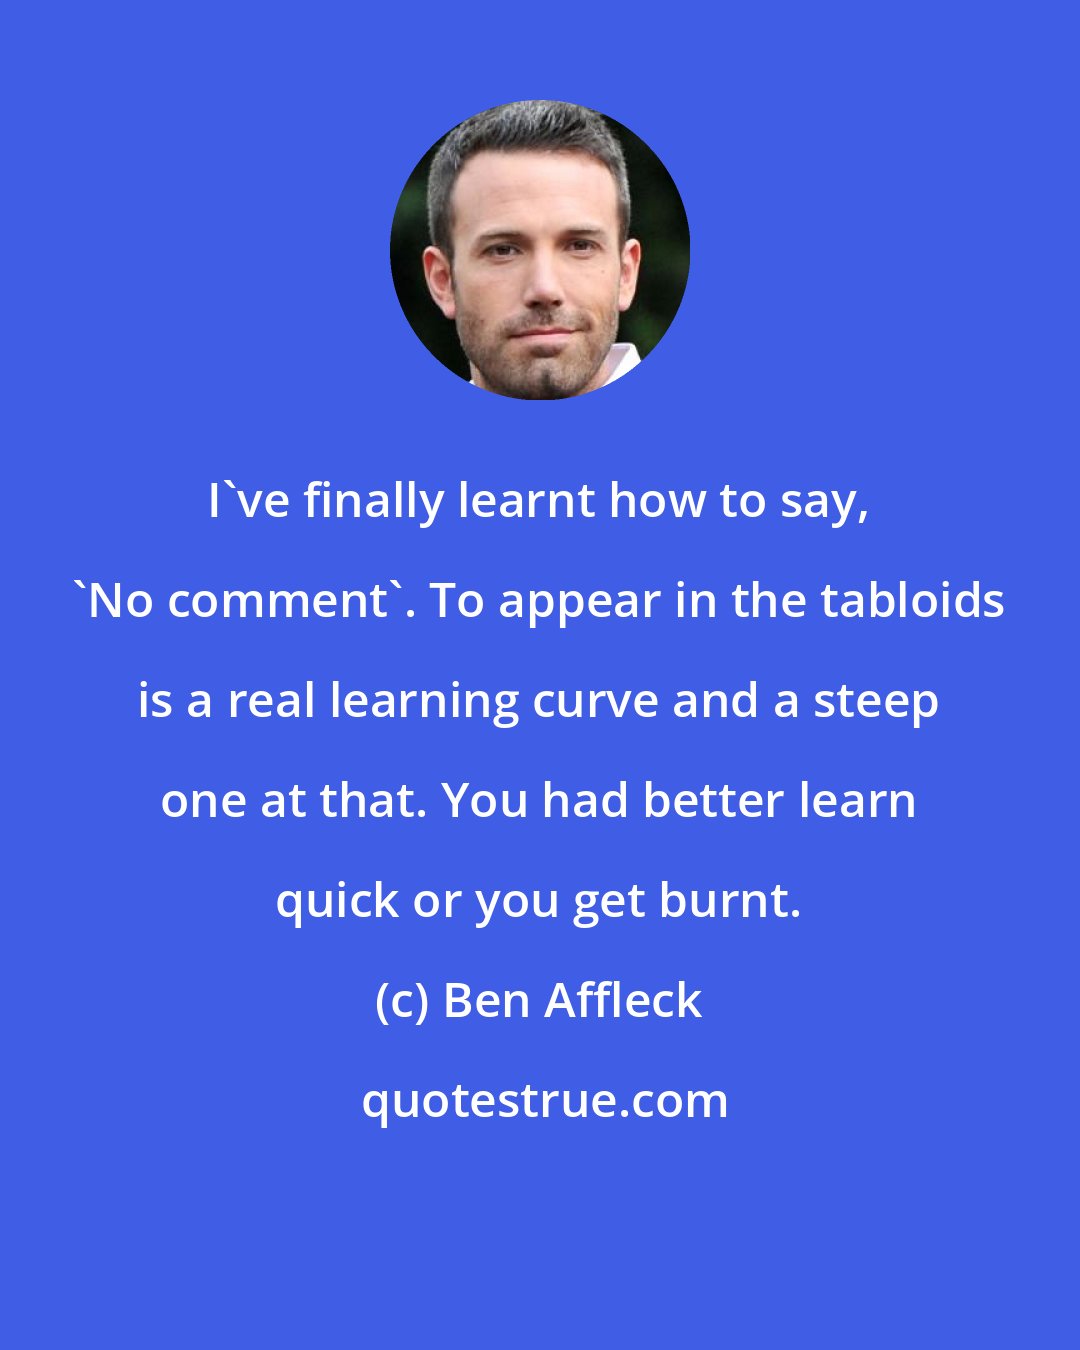 Ben Affleck: I've finally learnt how to say, 'No comment'. To appear in the tabloids is a real learning curve and a steep one at that. You had better learn quick or you get burnt.